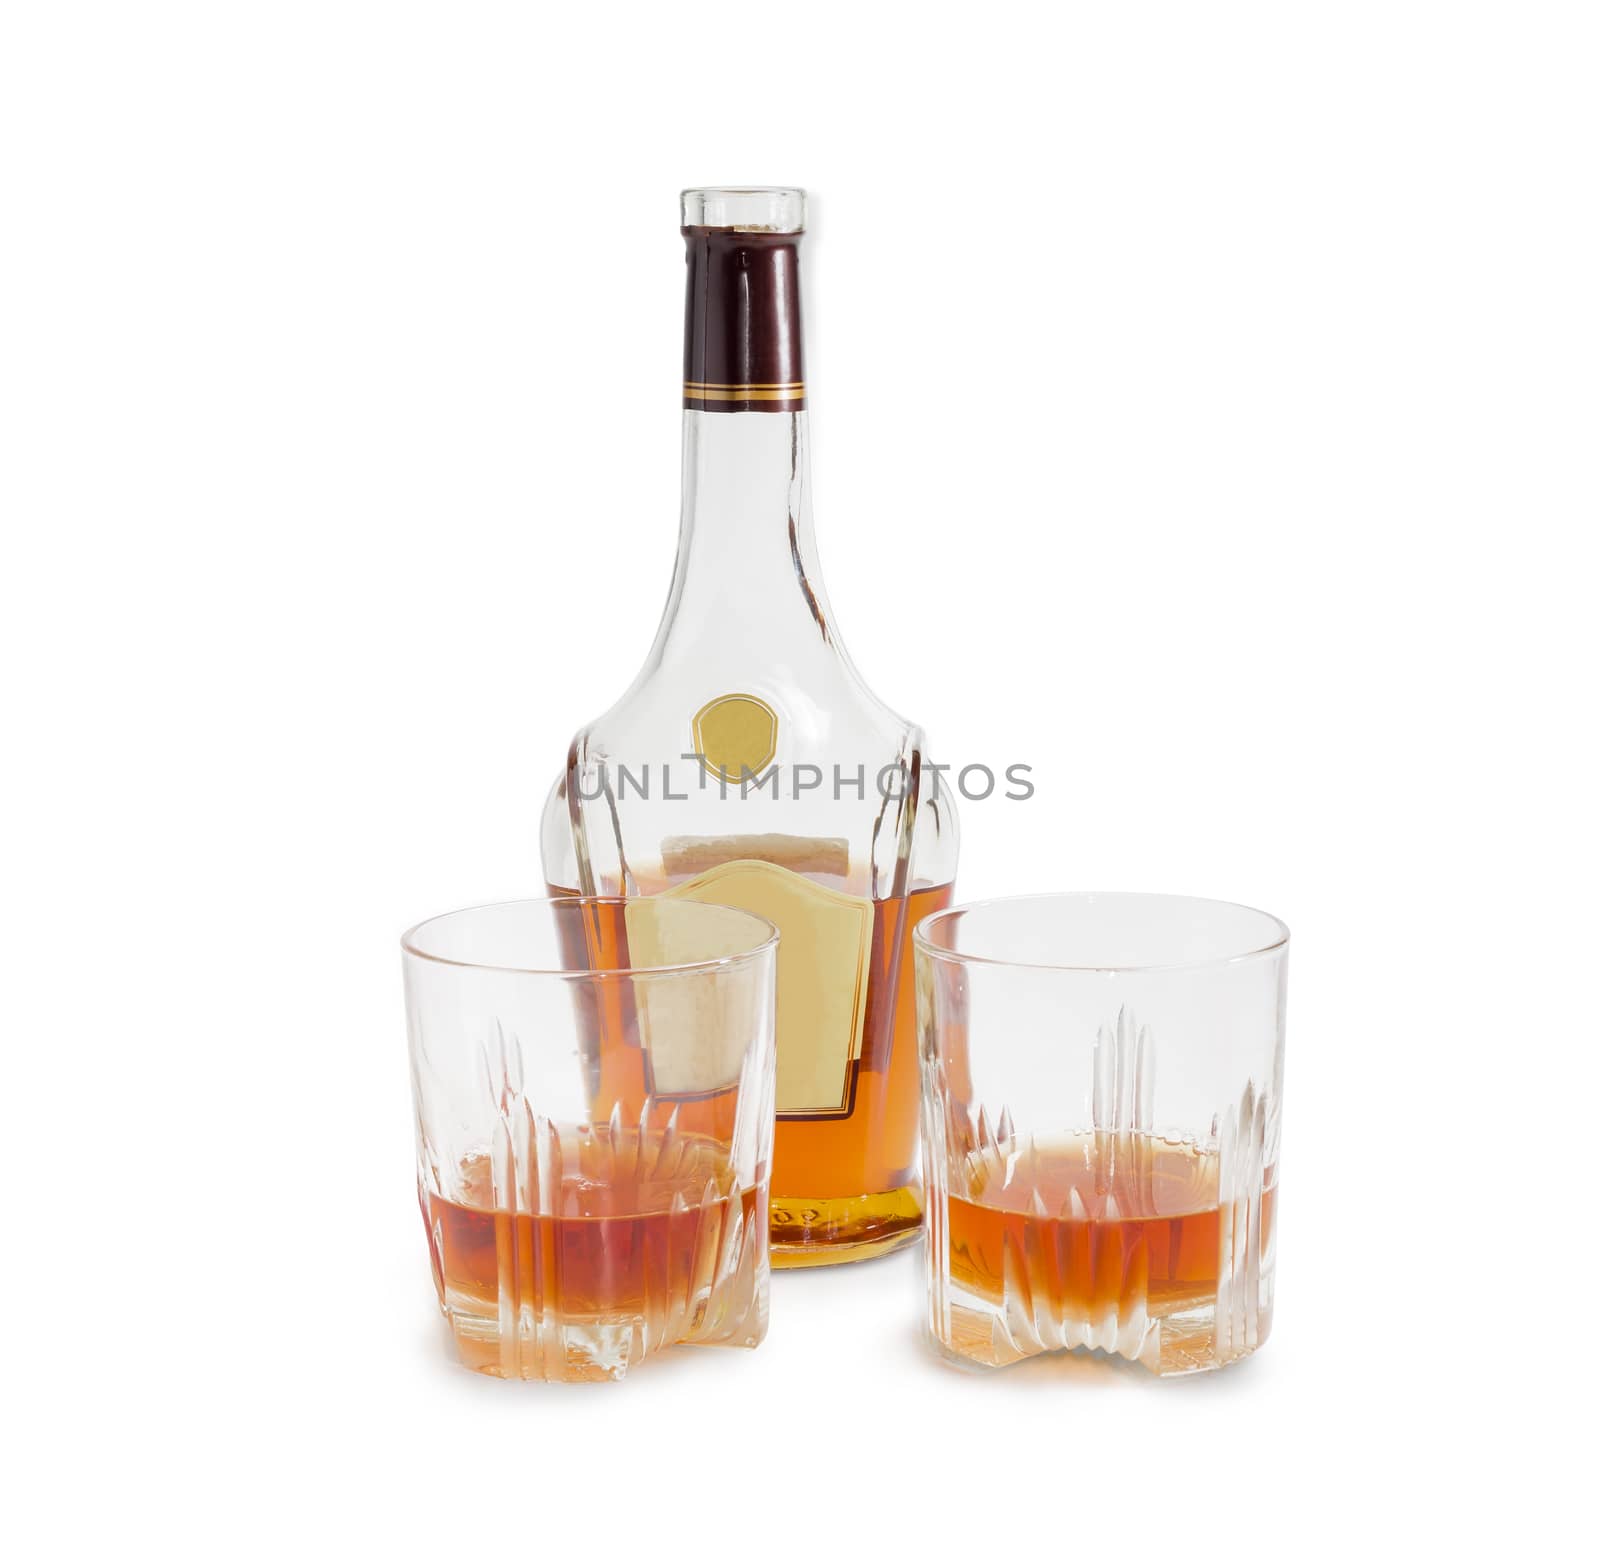 Opened bottle of whiskey and two glasses with whiskey on a light background
